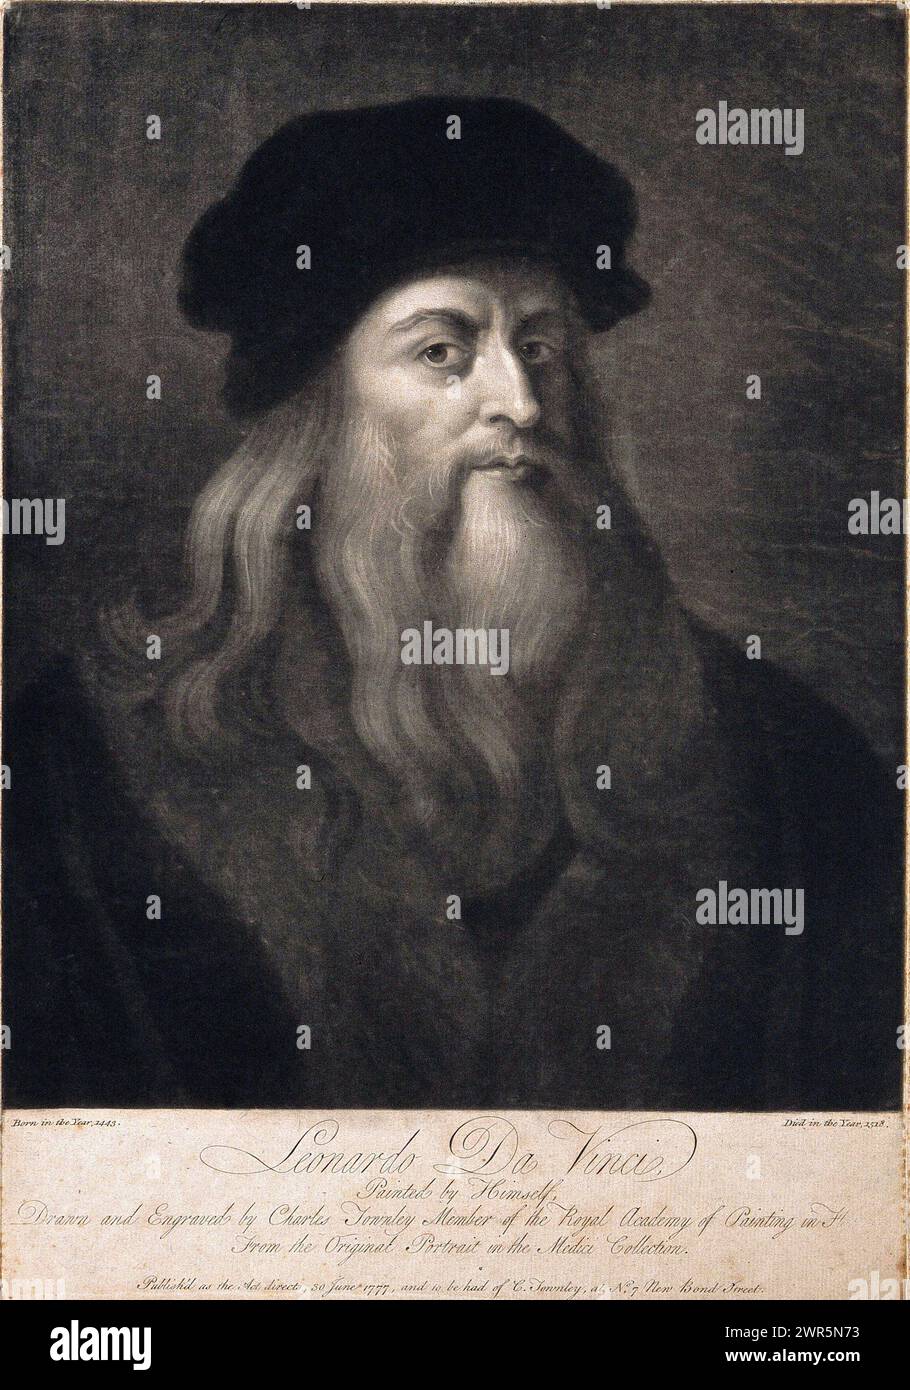 Leonardo da Vinci, 1452 – 1519, was an Italian polymath of the High Renaissance who was active as a painter, draughtsman, engineer, scientist, theorist, sculptor, and architect, mezzotint by Charles Townley after self portrait by Leonardo, Date: 1777 Stock Photo